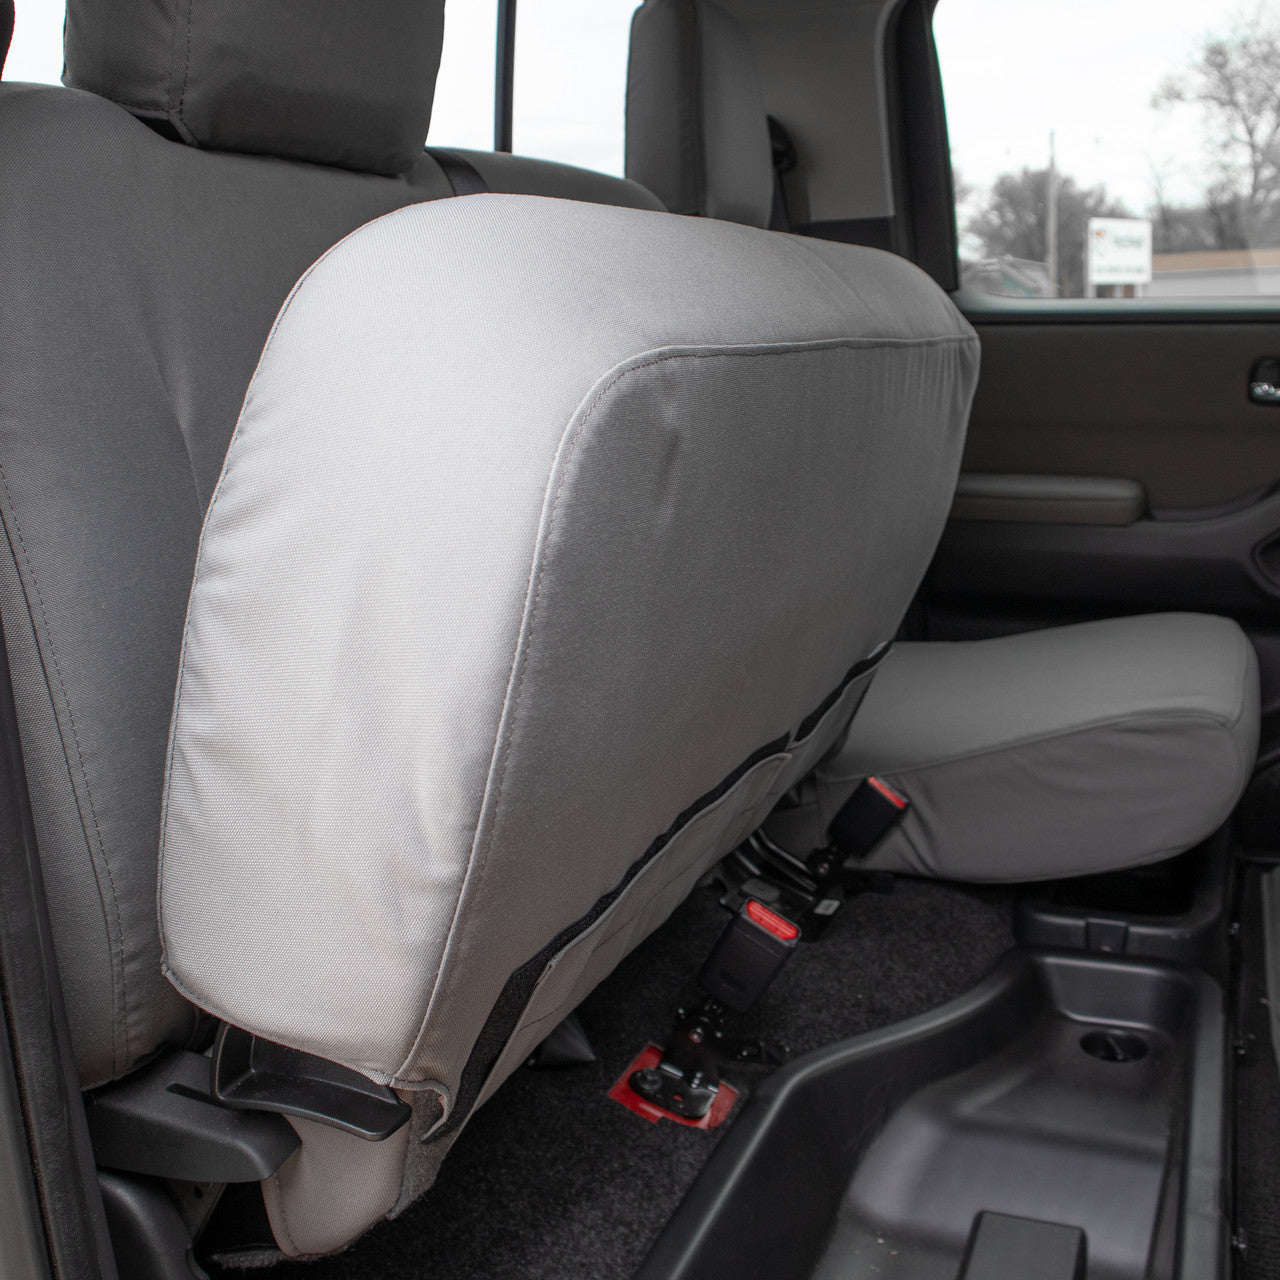 Nissan Frontier Rear Antimicrobial Seat Covers (ST95500)